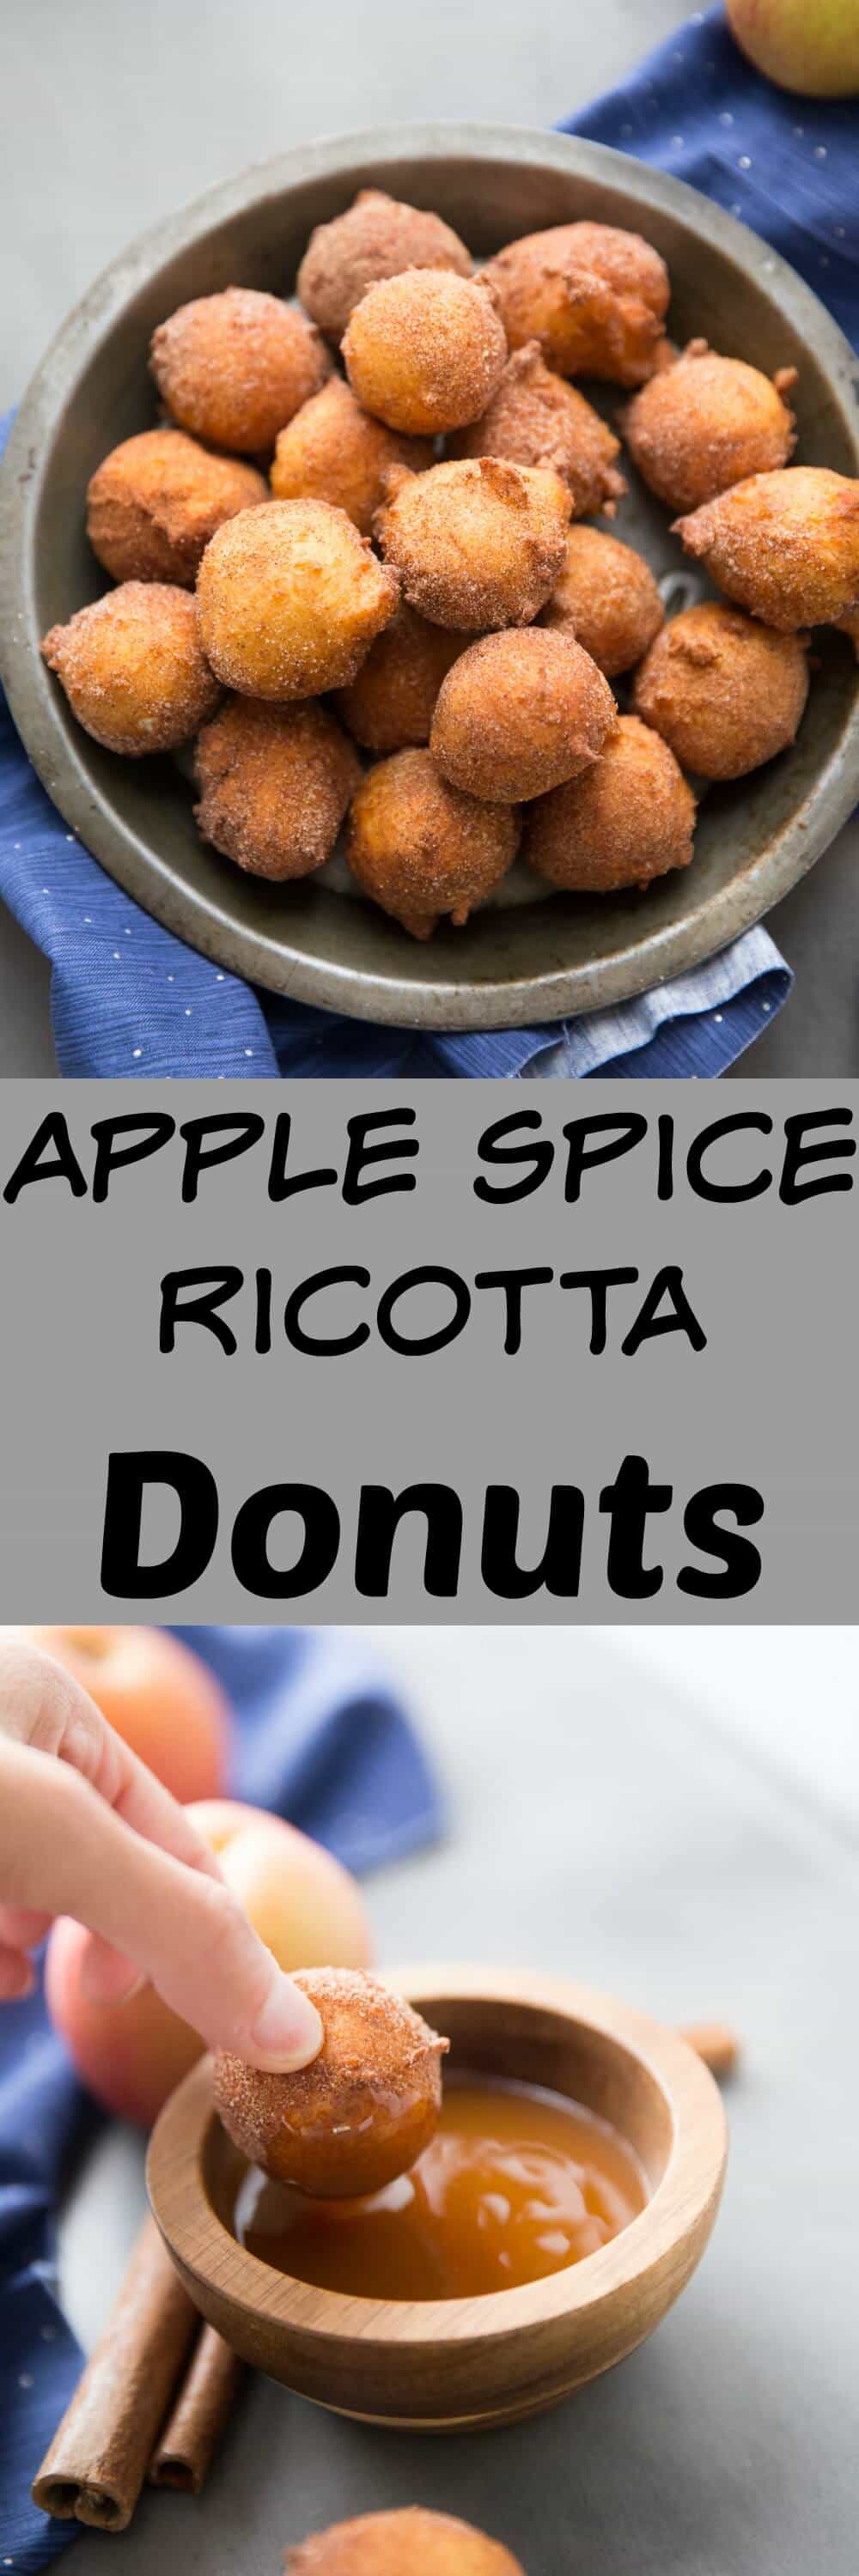 These little ricotta donuts have loads of apple spice flavor.  Grab them while they are hot and dip them in caramel sauce!